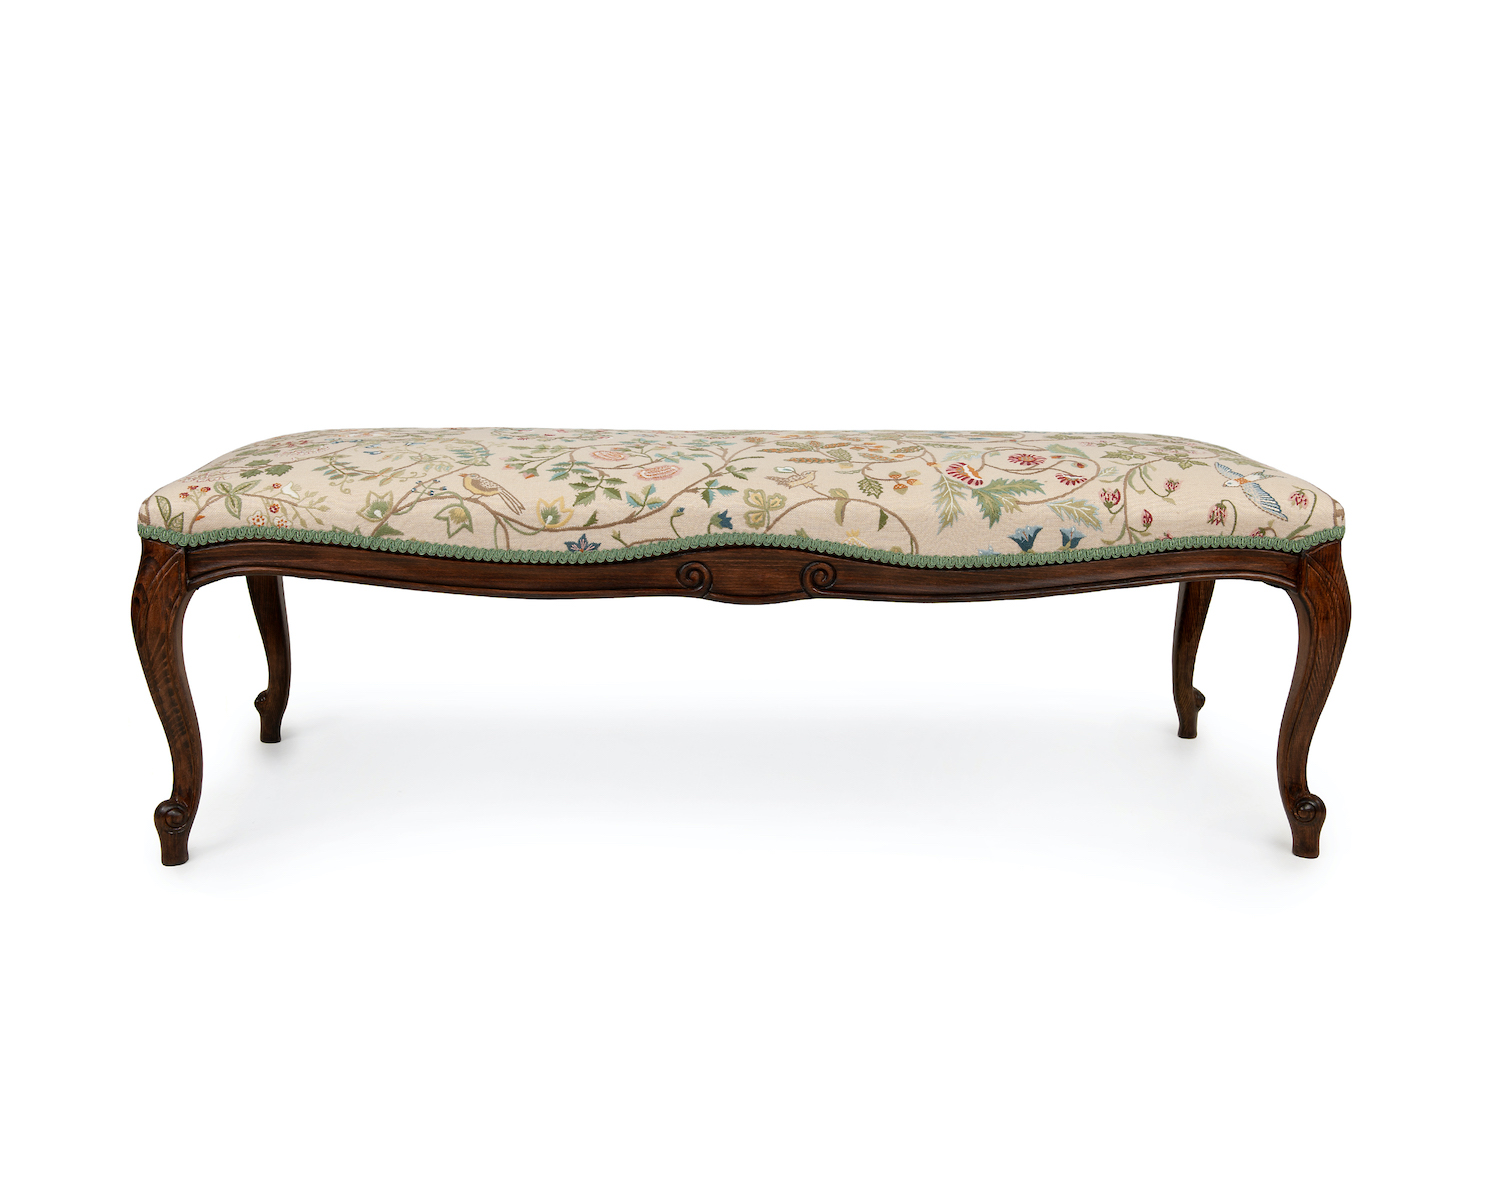 Italian Hand Carved Bench in Embroidered Fabric with Gimp Braid